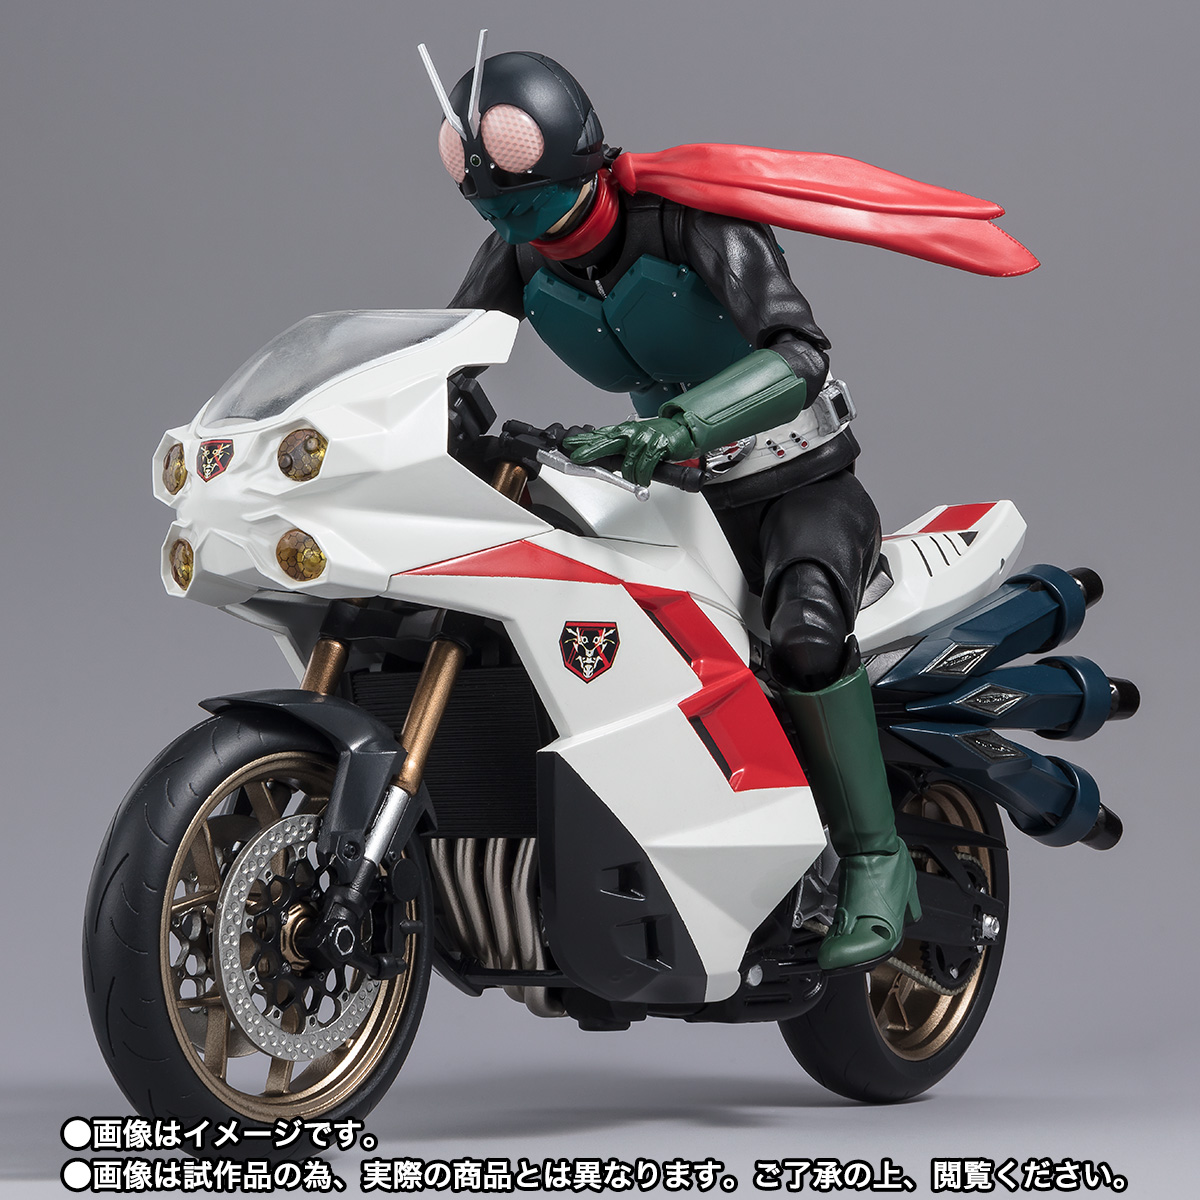 S.H.Figuarts サイクロン号（シン・仮面ライダー） 01